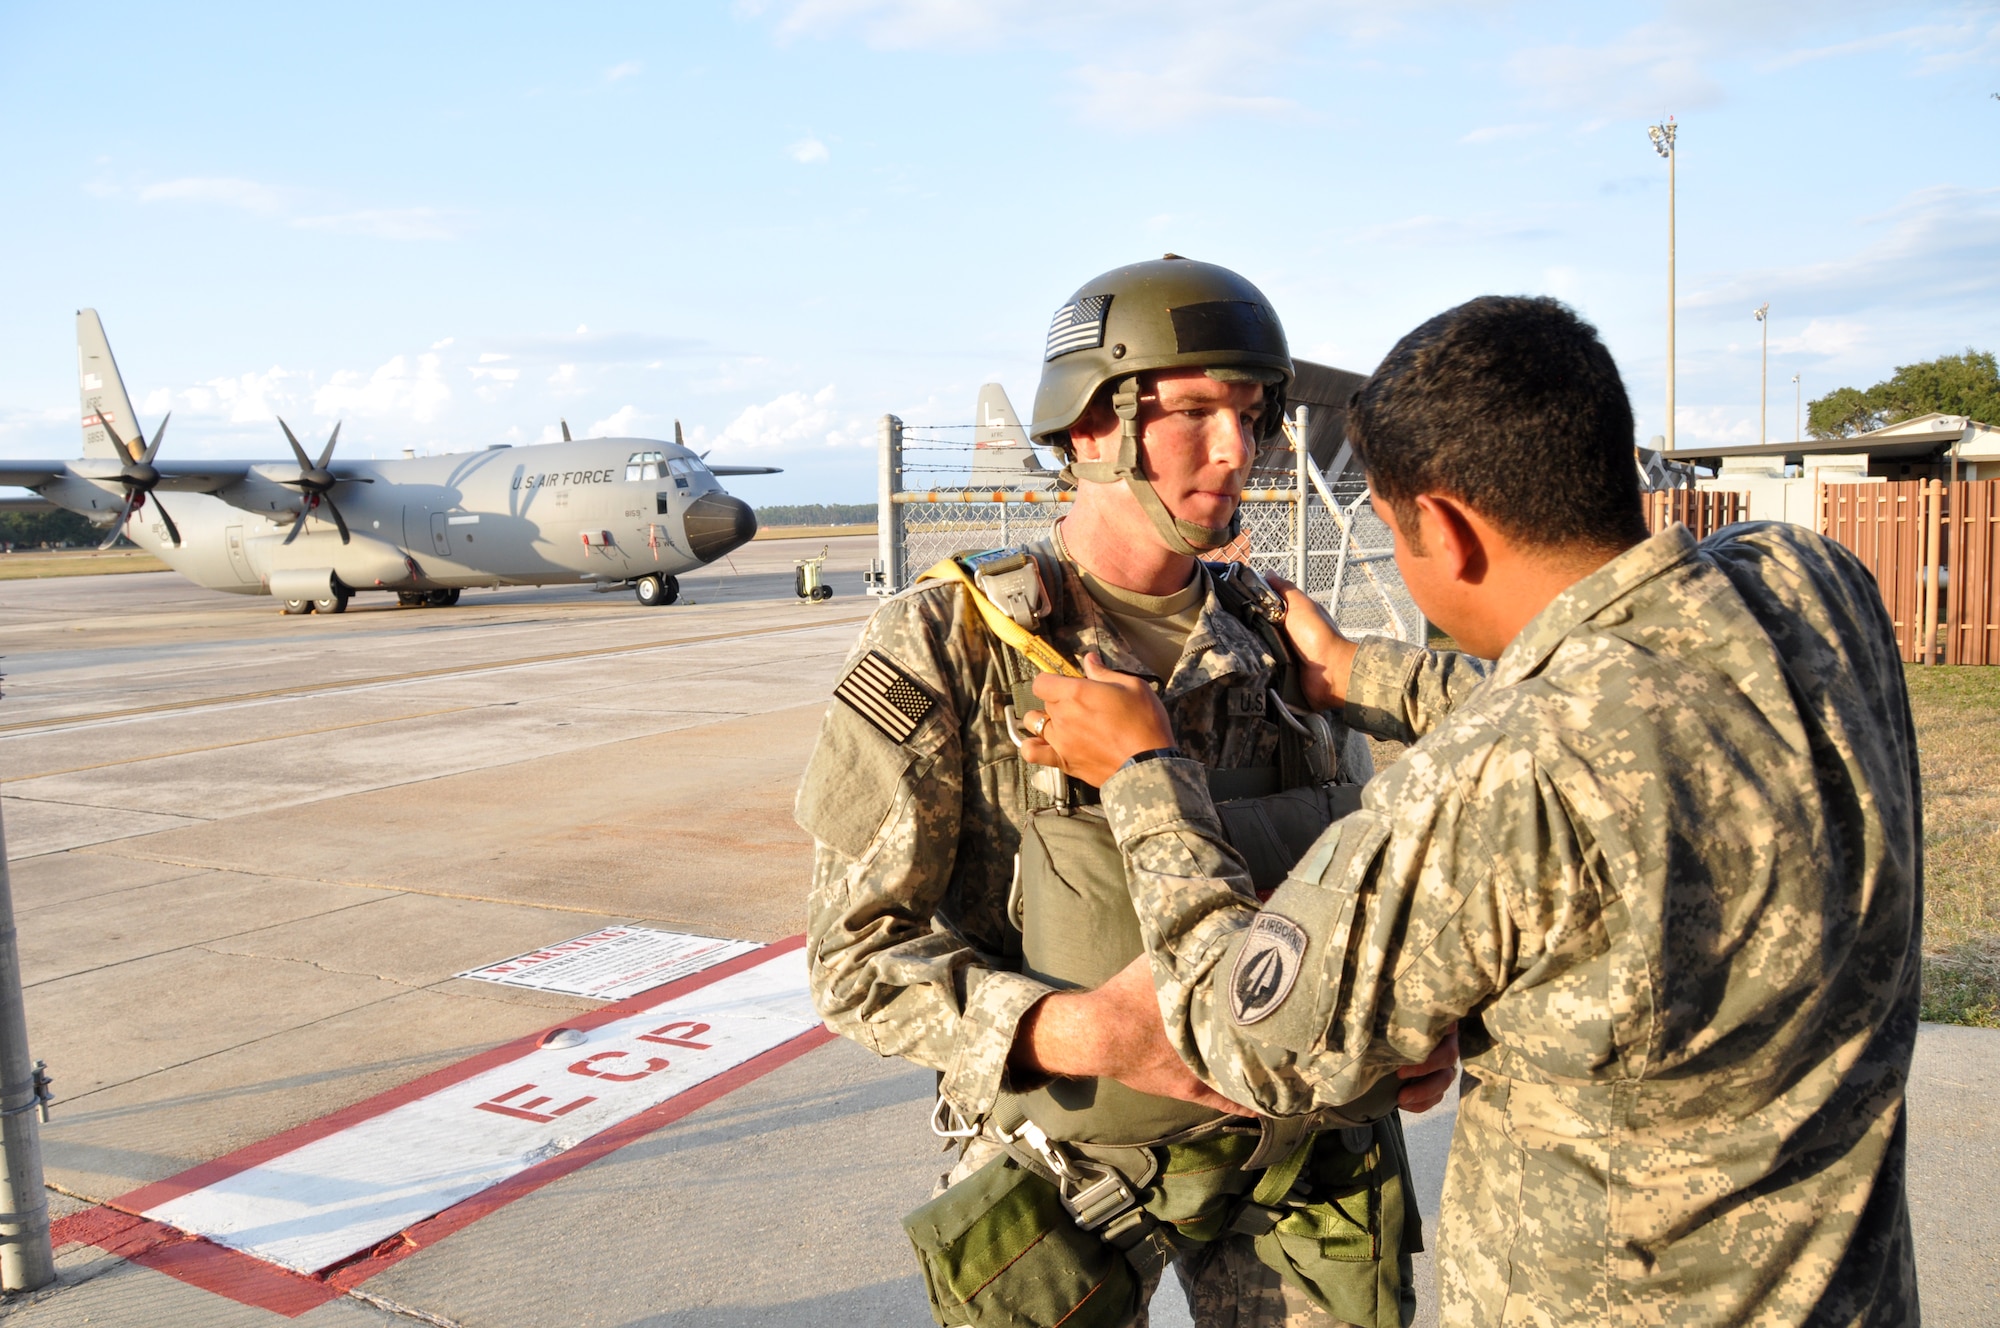 The 160th Special Operations Aviation Regiment paratroopers check their equipment before a jump out of an 815th Airlift Squadron C-130J to establish a Forward Army Refueling Point in support of the Operation Southern Strike exercise in South Mississippi Oct. 29, 2014. The 160th SOAR is headquartered in Fort Campbell, Kentucky. The 815th AS is an Air Force Reserve unit stationed at Keesler Air Force Base, Mississippi. (Master Sgt. Brian Lamar/U.S. Air Force photo)